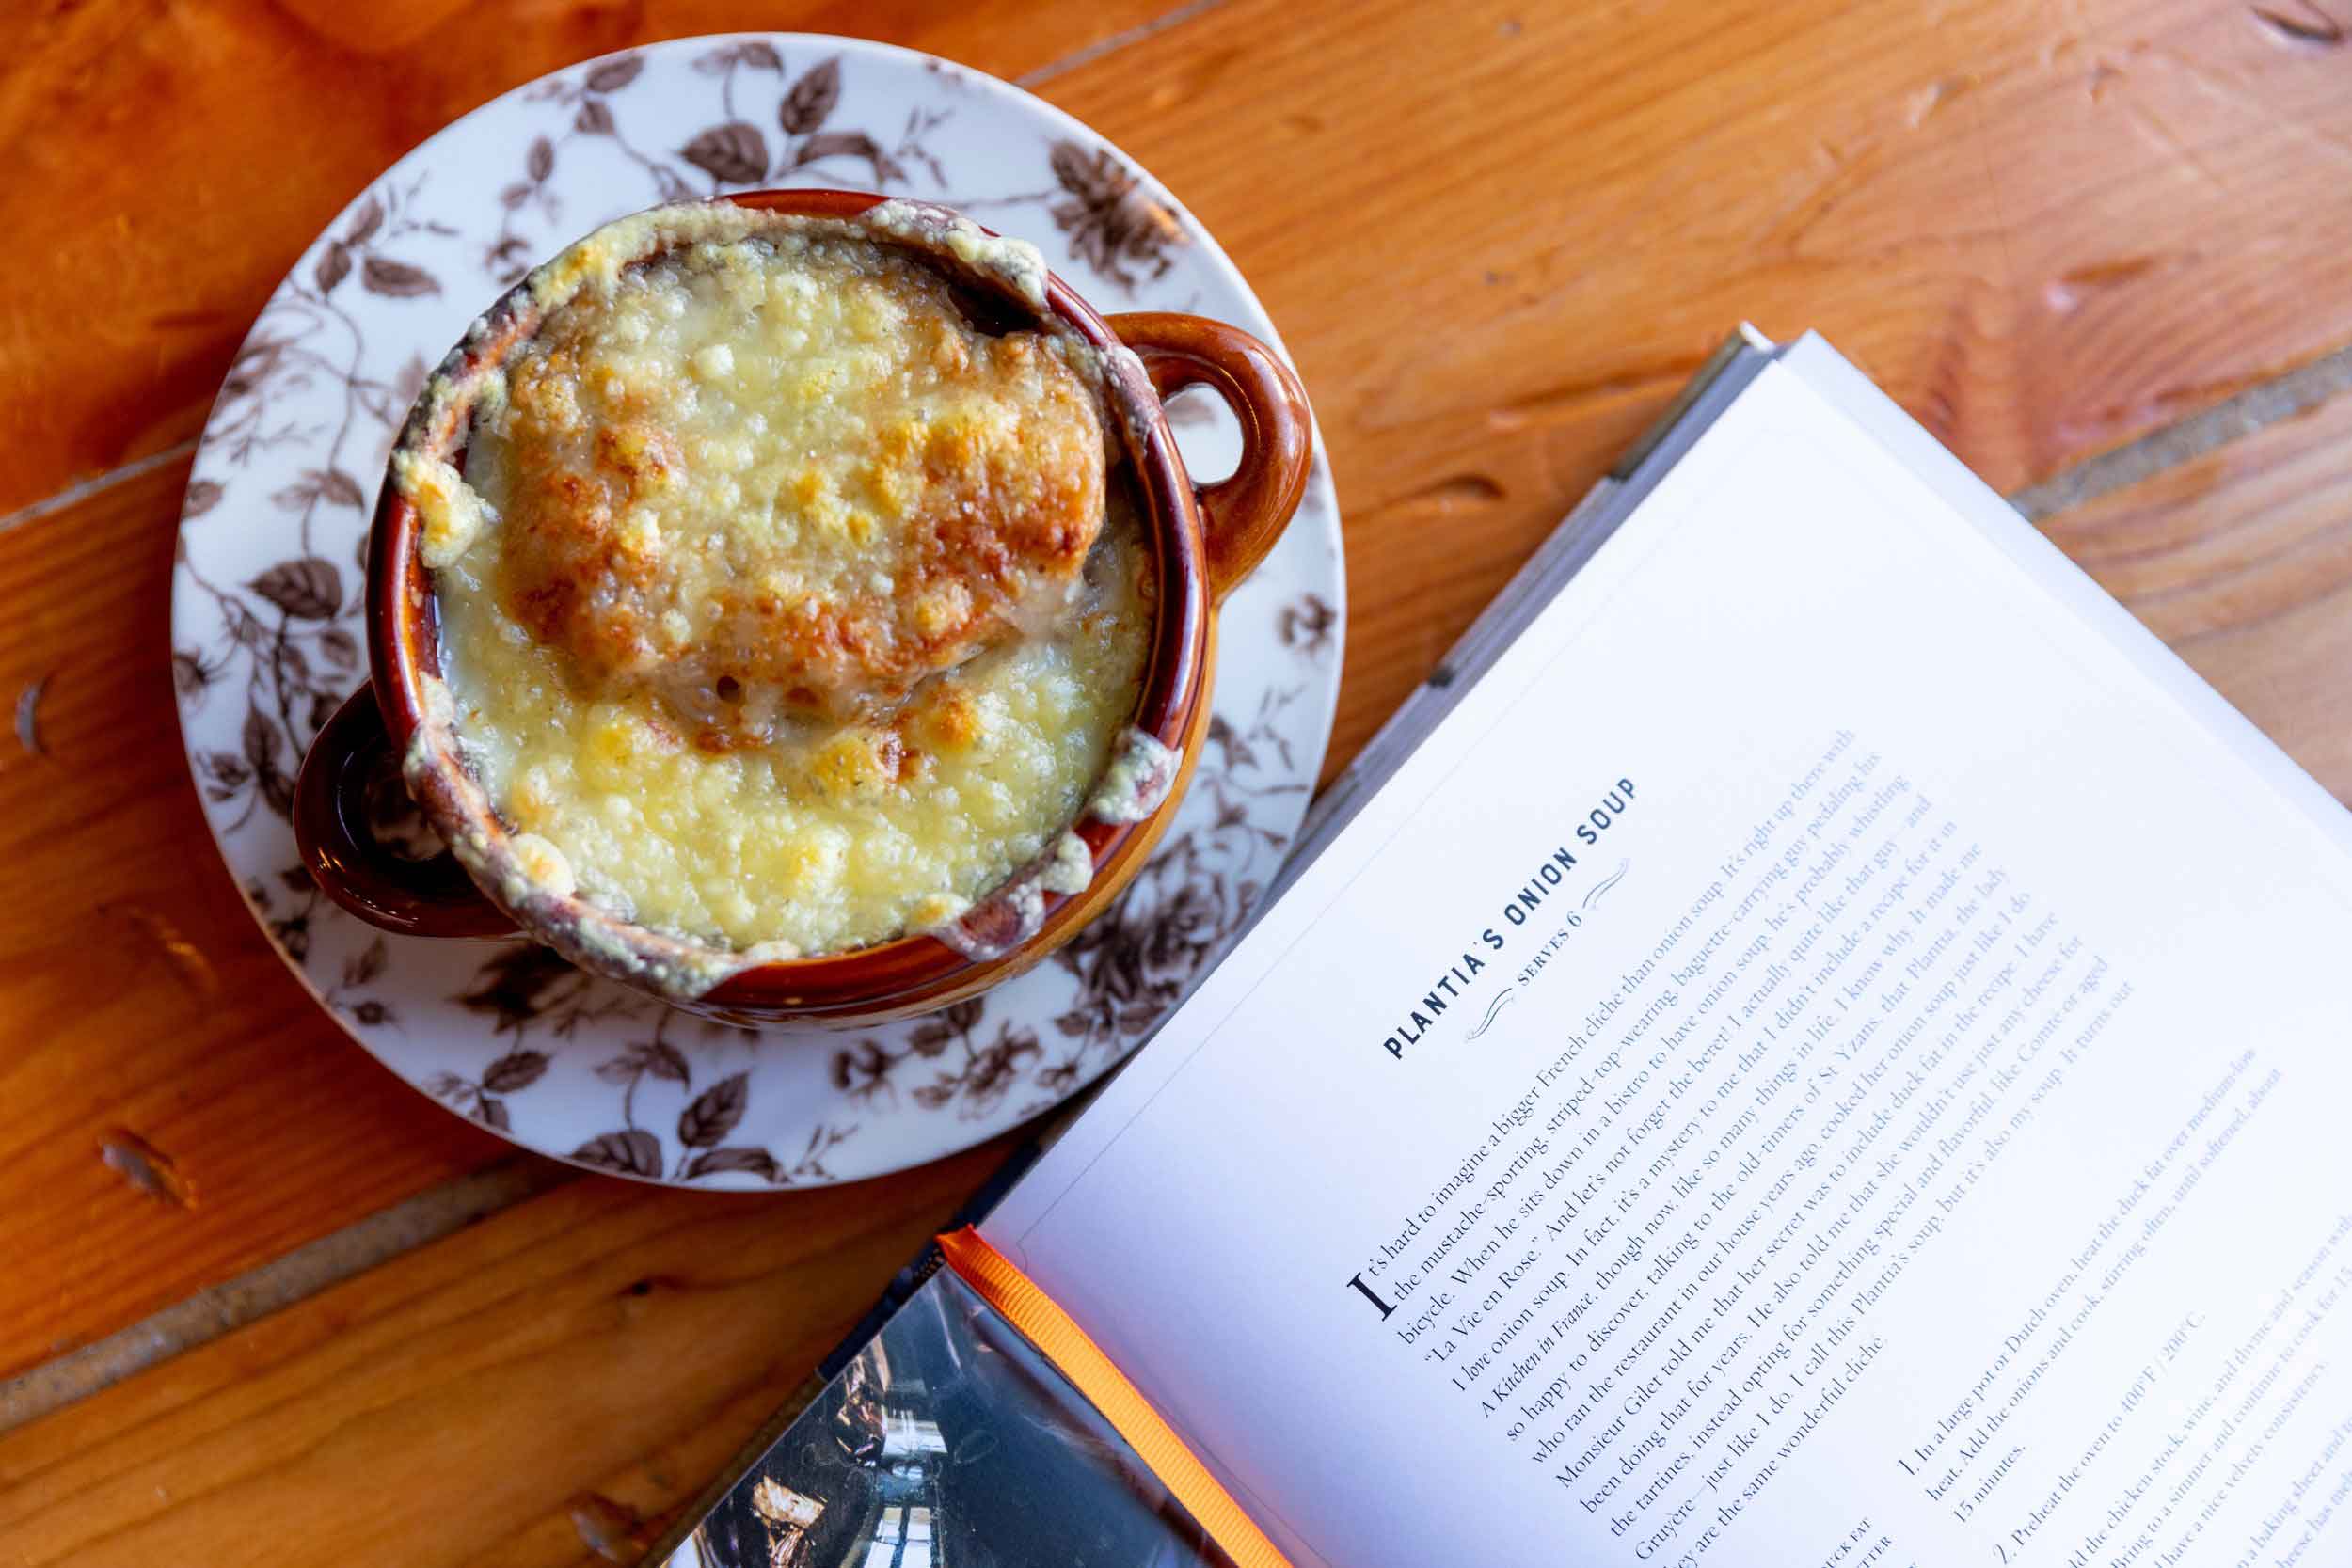 A Bowl Of Soup On A Plate Next To A Book